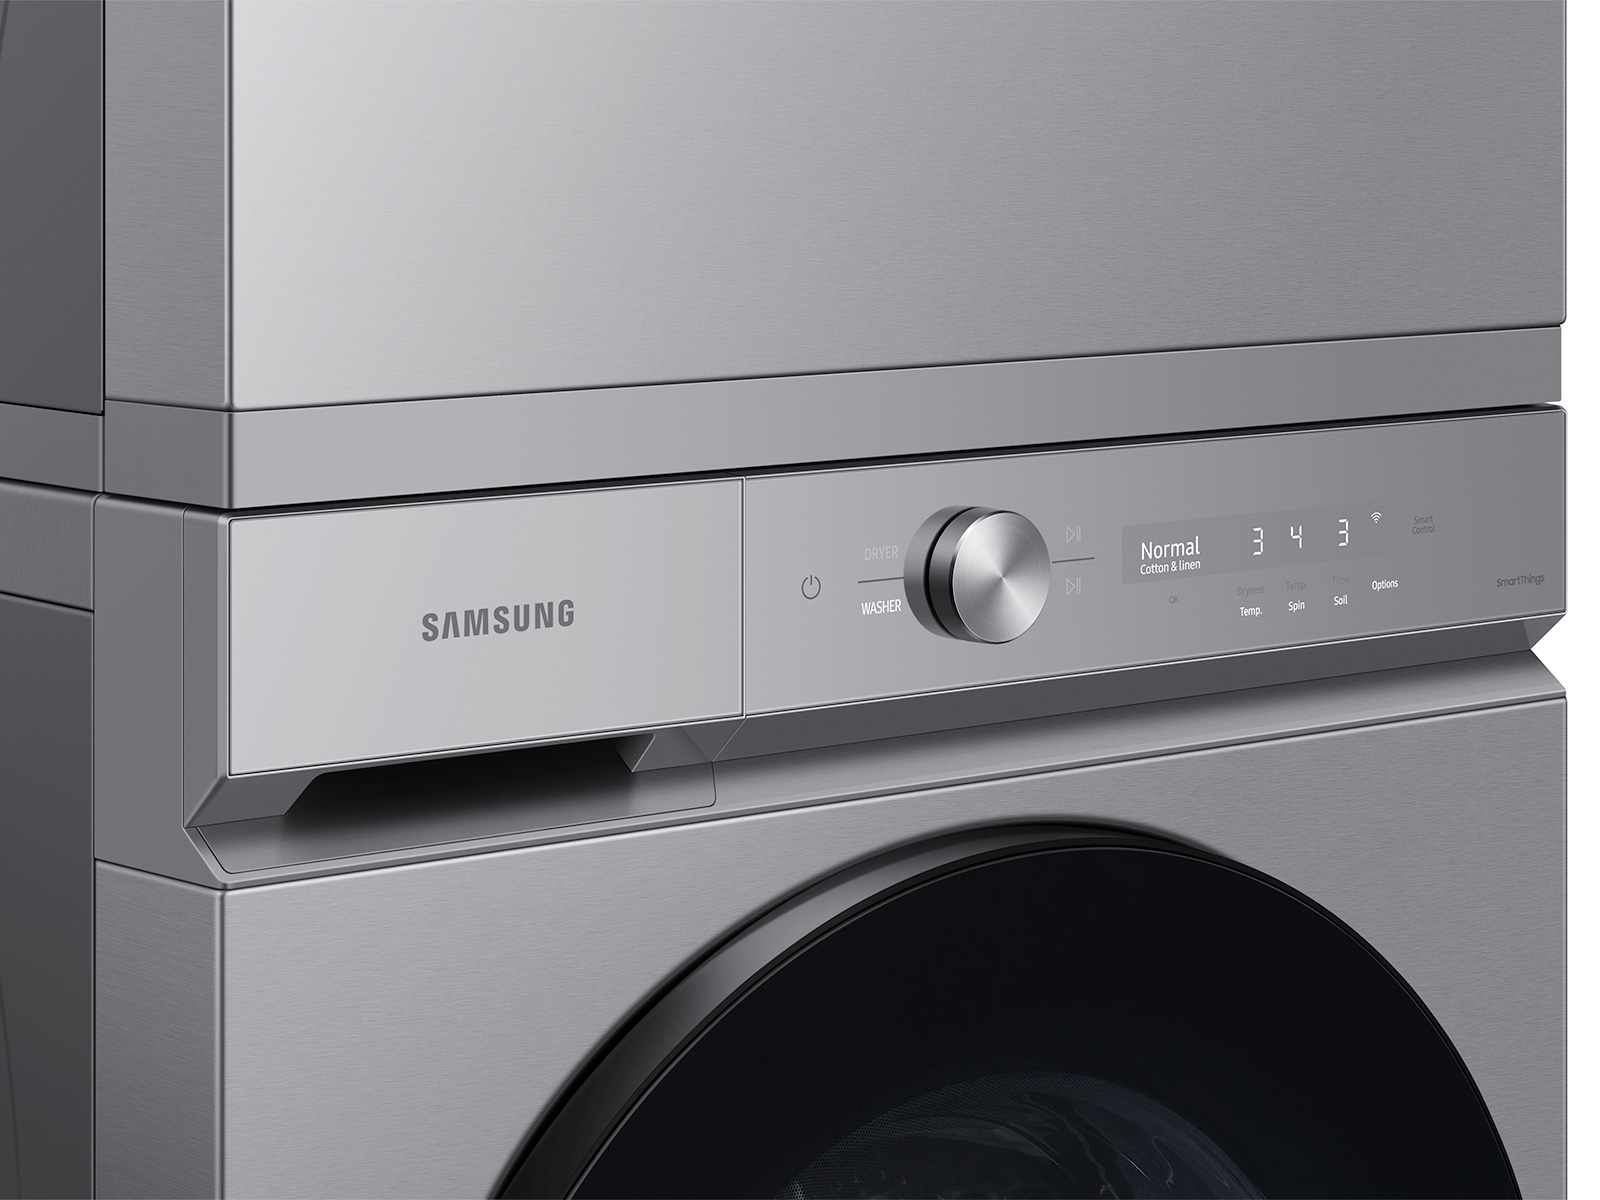 Thumbnail image of Bespoke Ultra Capacity Front Load Washer and Gas Dryer in Silver Steel